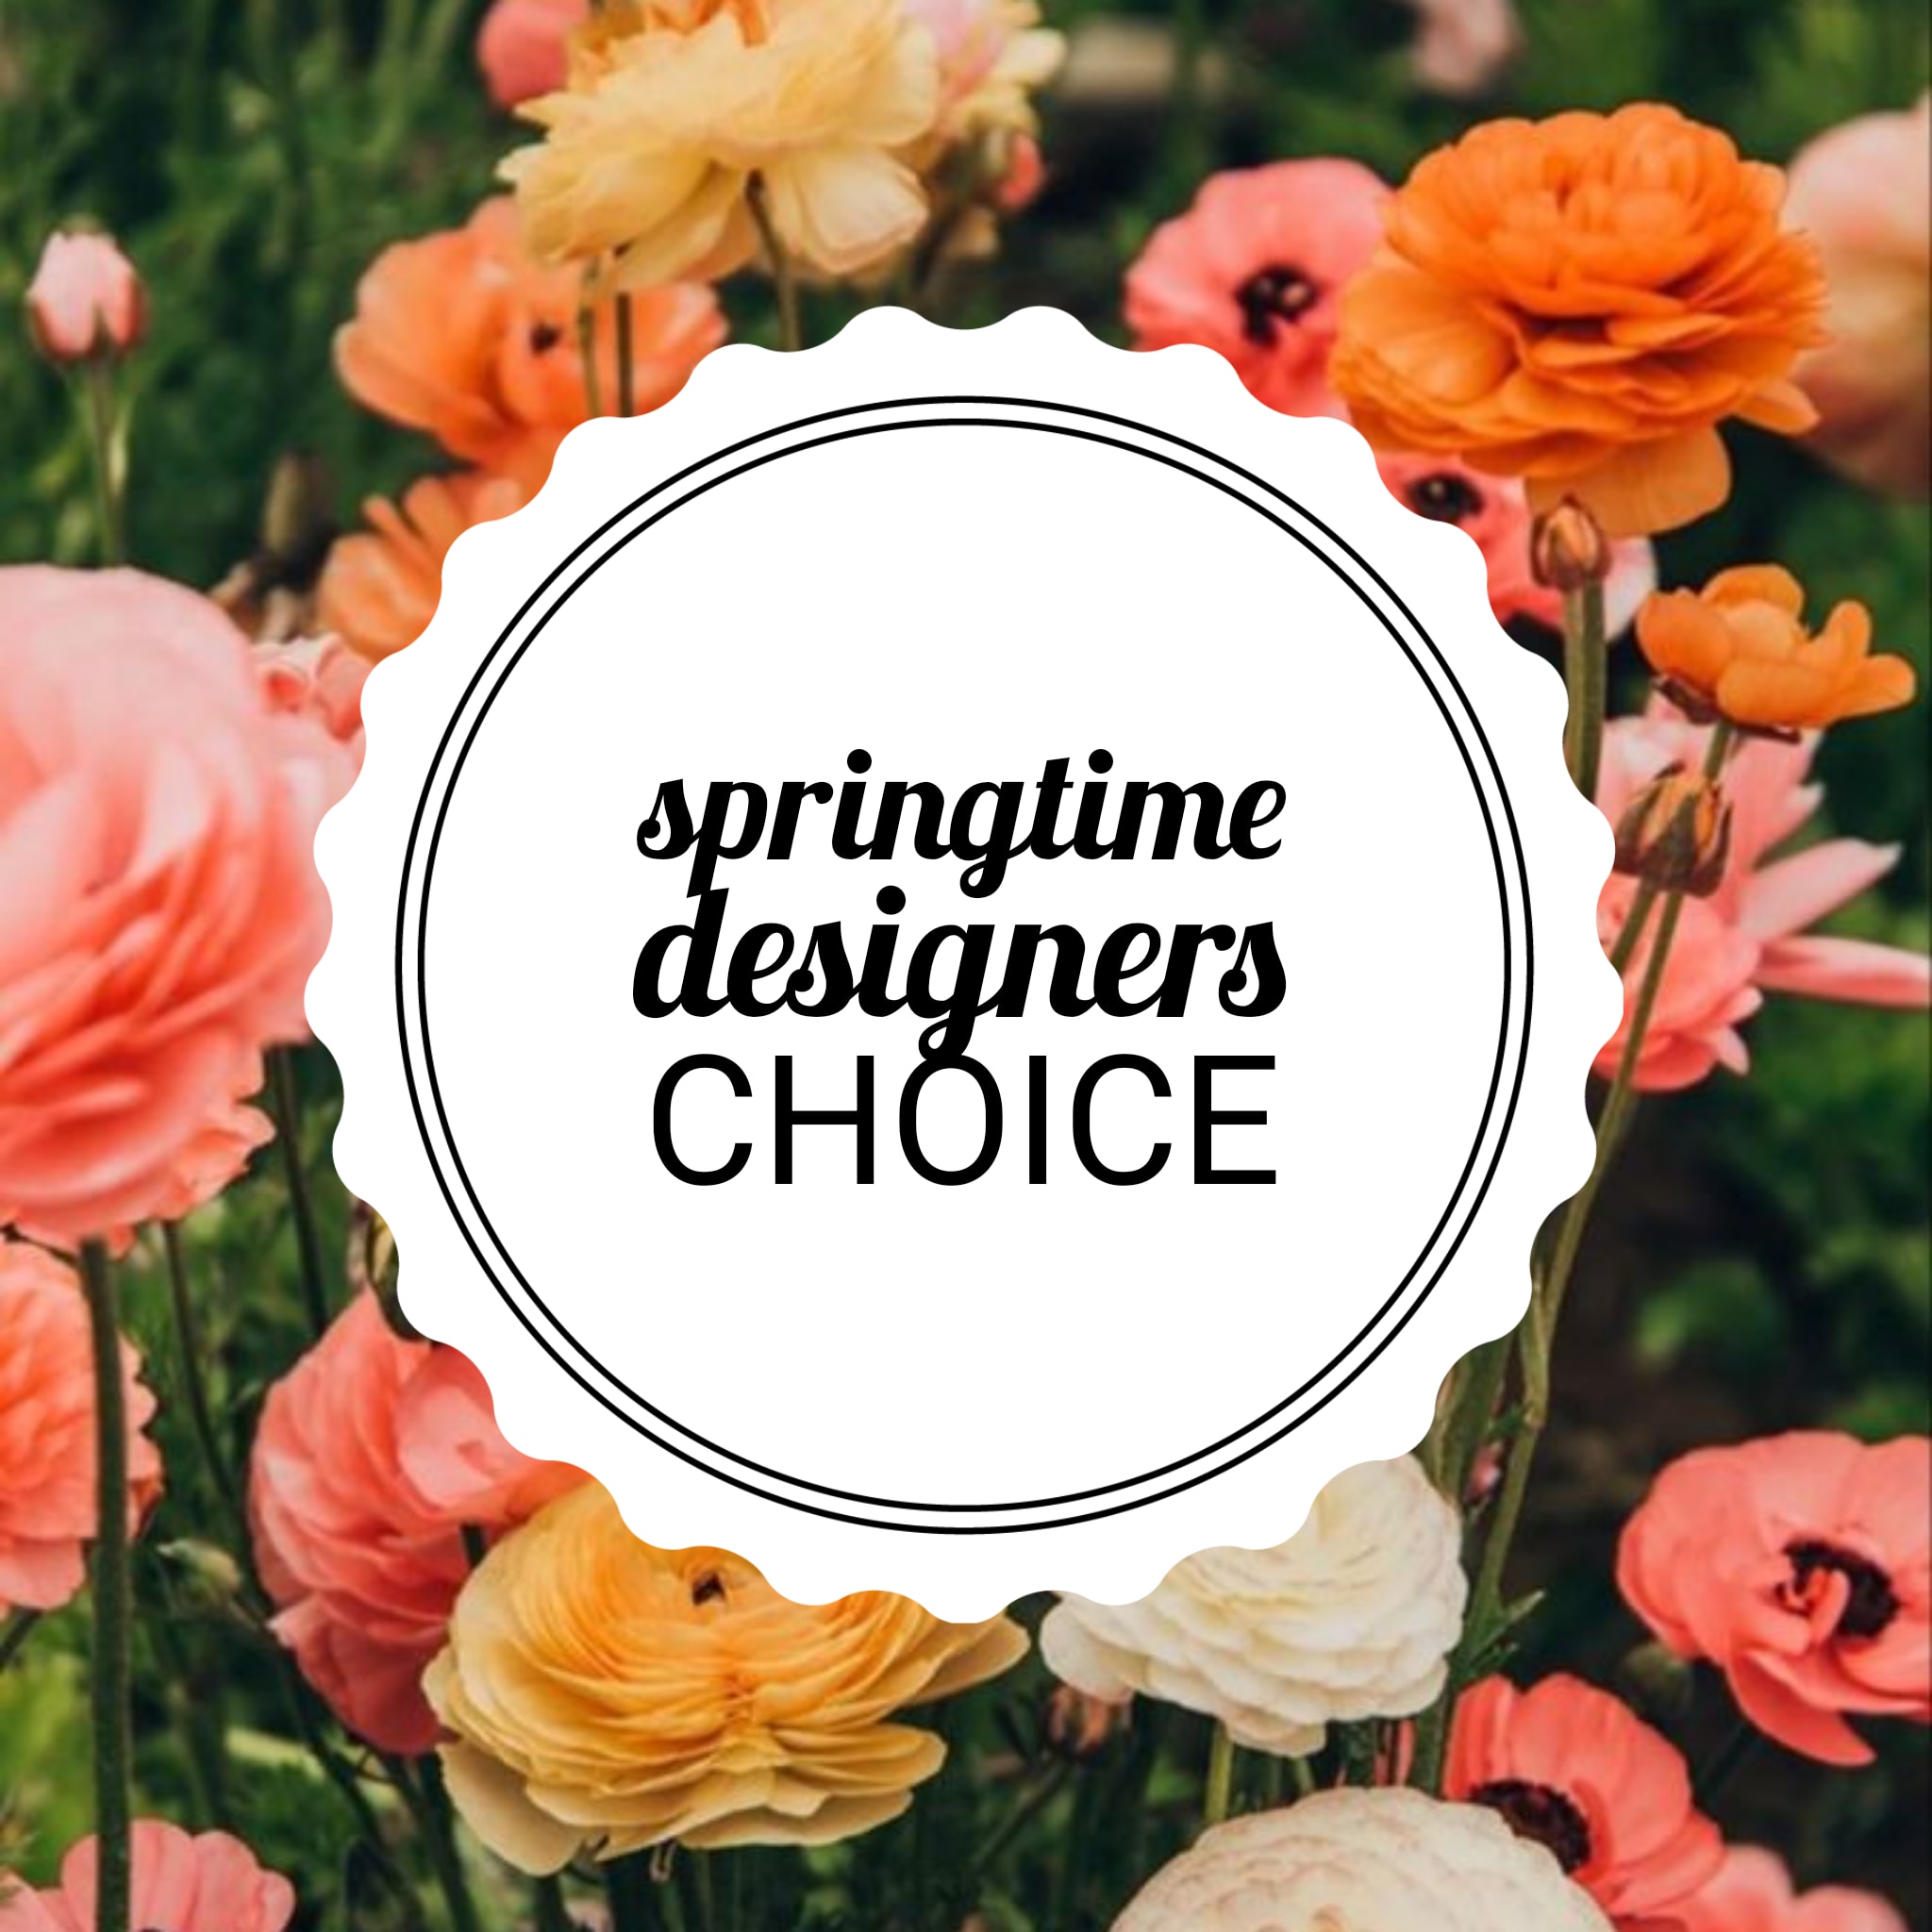 Spring Designers Choice -  This beautiful spring bouquet has a variety of bright, cheerful,  blooms!